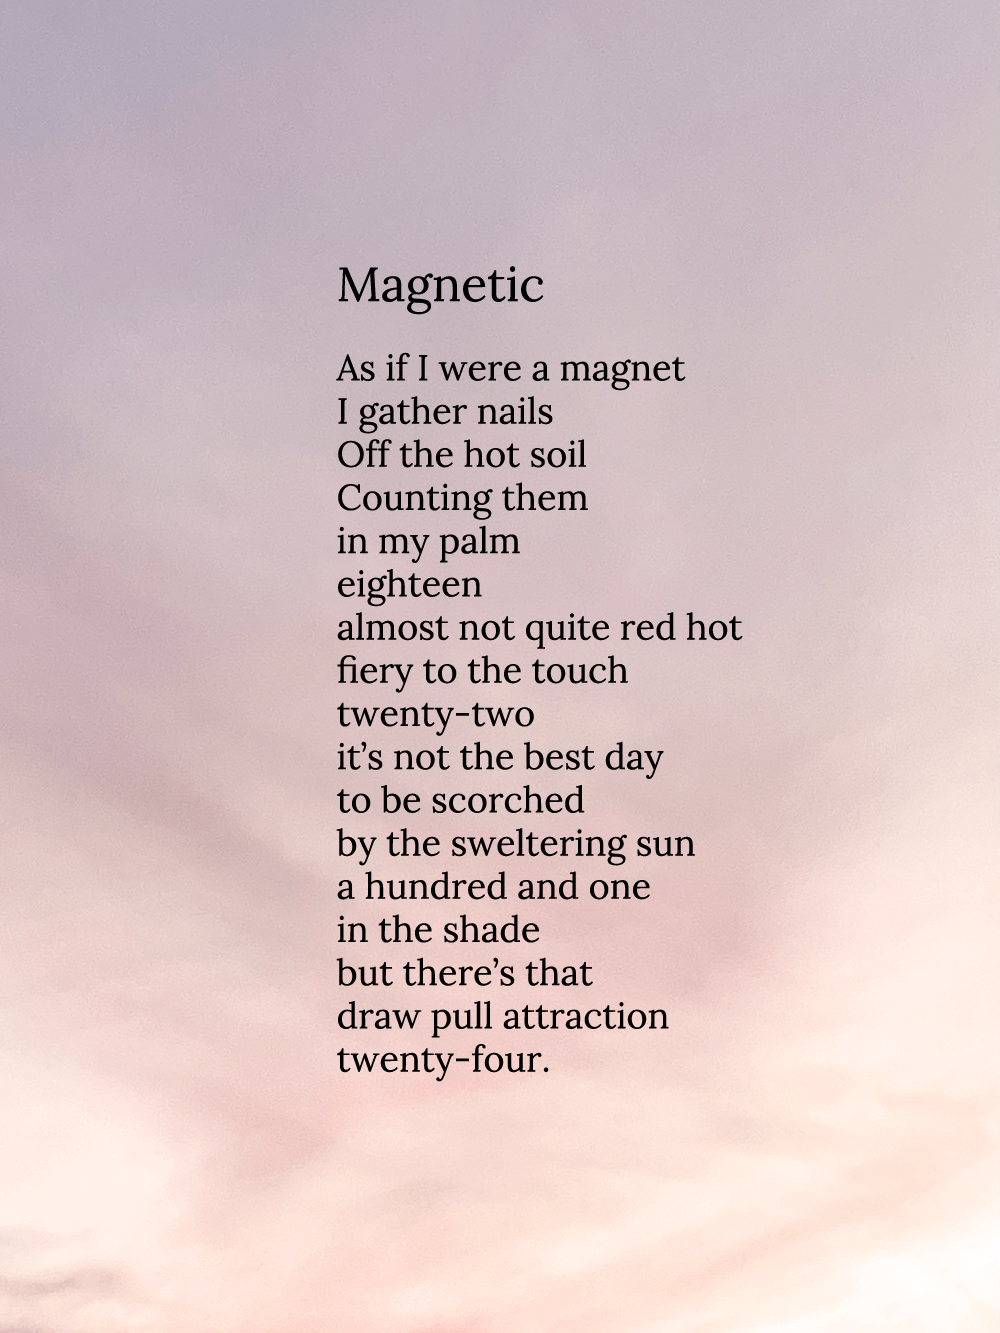 A photo of clouds and a poem called Magnetic by Ingrid Lobo